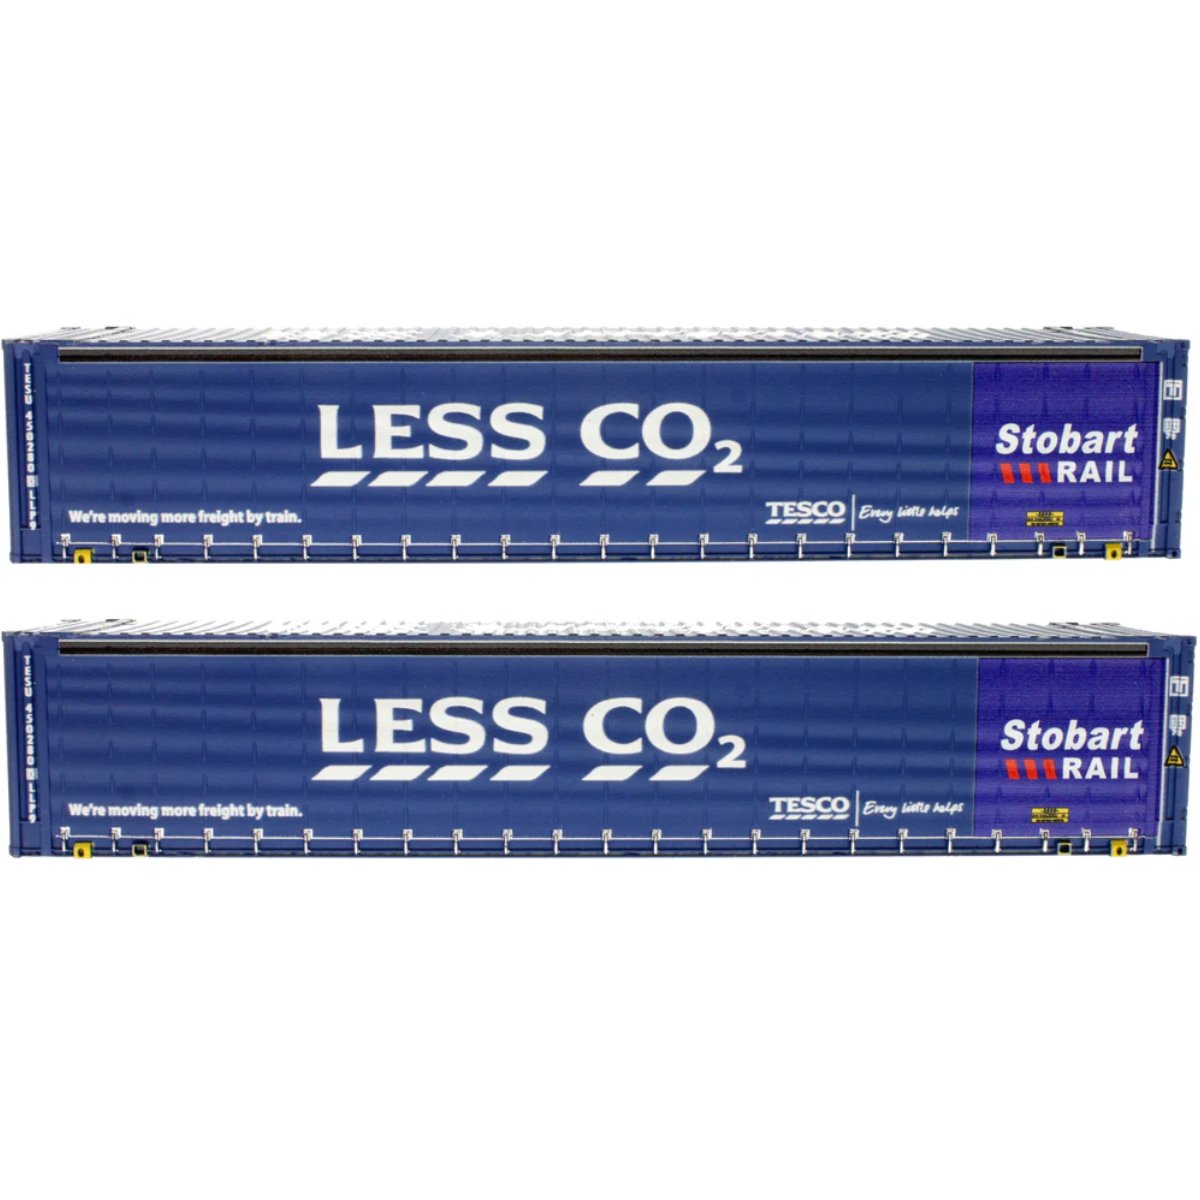 Dapol 4F - 028 - 021 45FT Containers Curtainsided Less CO2 Stobart Rail - OO Gauge - Phillips Hobbies